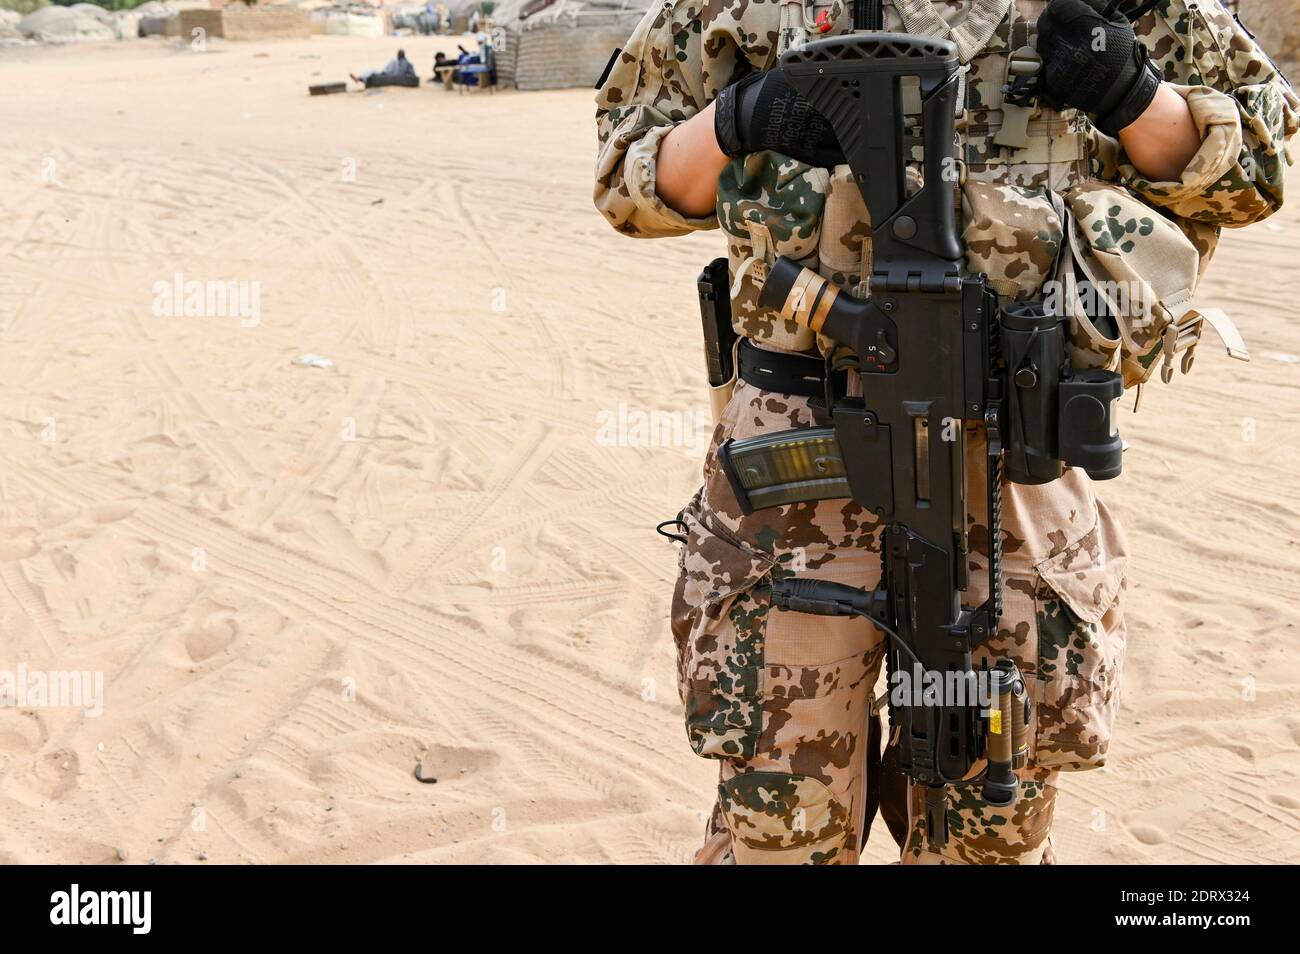 MALI, Gao, Minusma UN peace keeping mission, Camp Castor, german army  Bundeswehr, german female soldier in desert camouflage uniform equipped  with HK Heckler and Koch machine gun G36 / MALI, Gao, Minusma